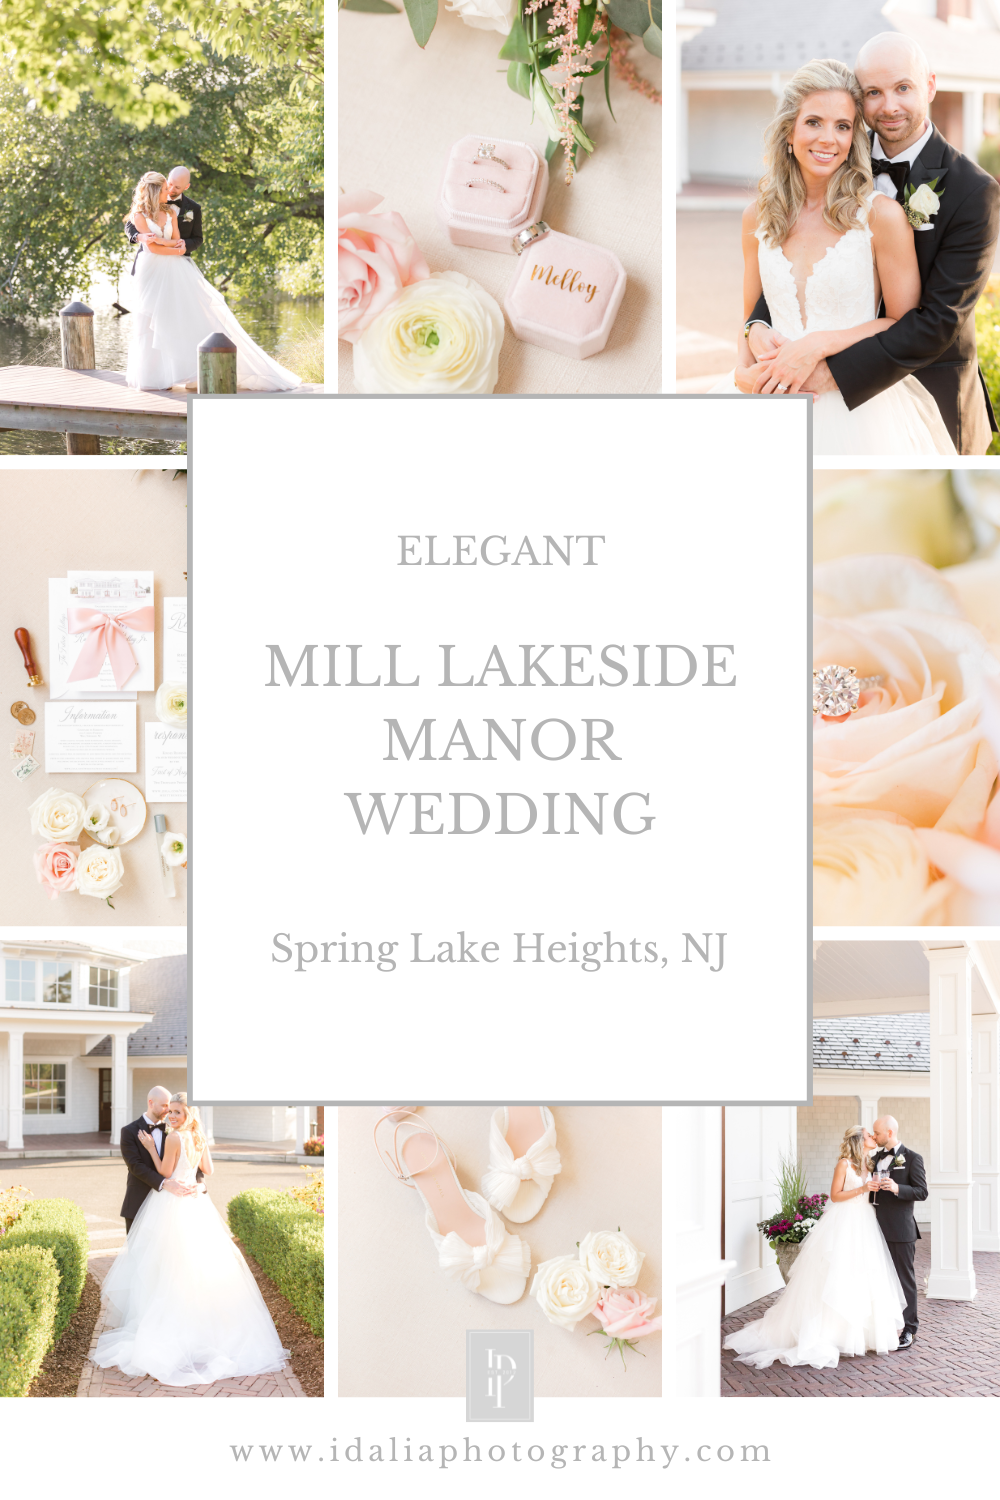 Elegant fall wedding at The Mill Lakeside Manor in New Jersey photographed by NJ wedding photographer Idalia Photography.